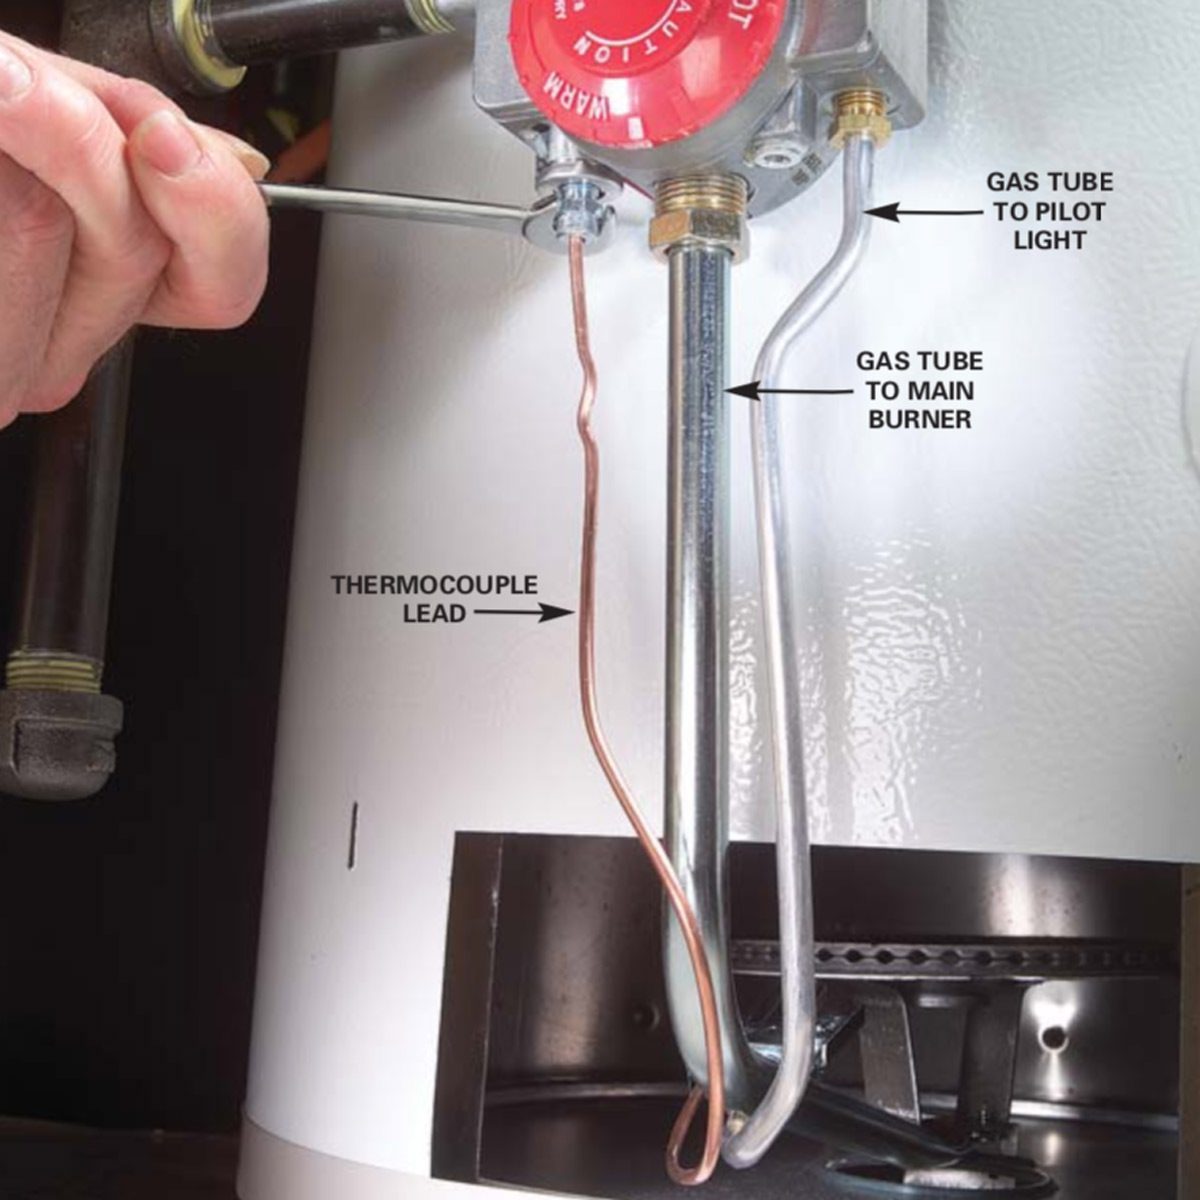 Replacing a Thermocouple on a Gas Hot Water Heater